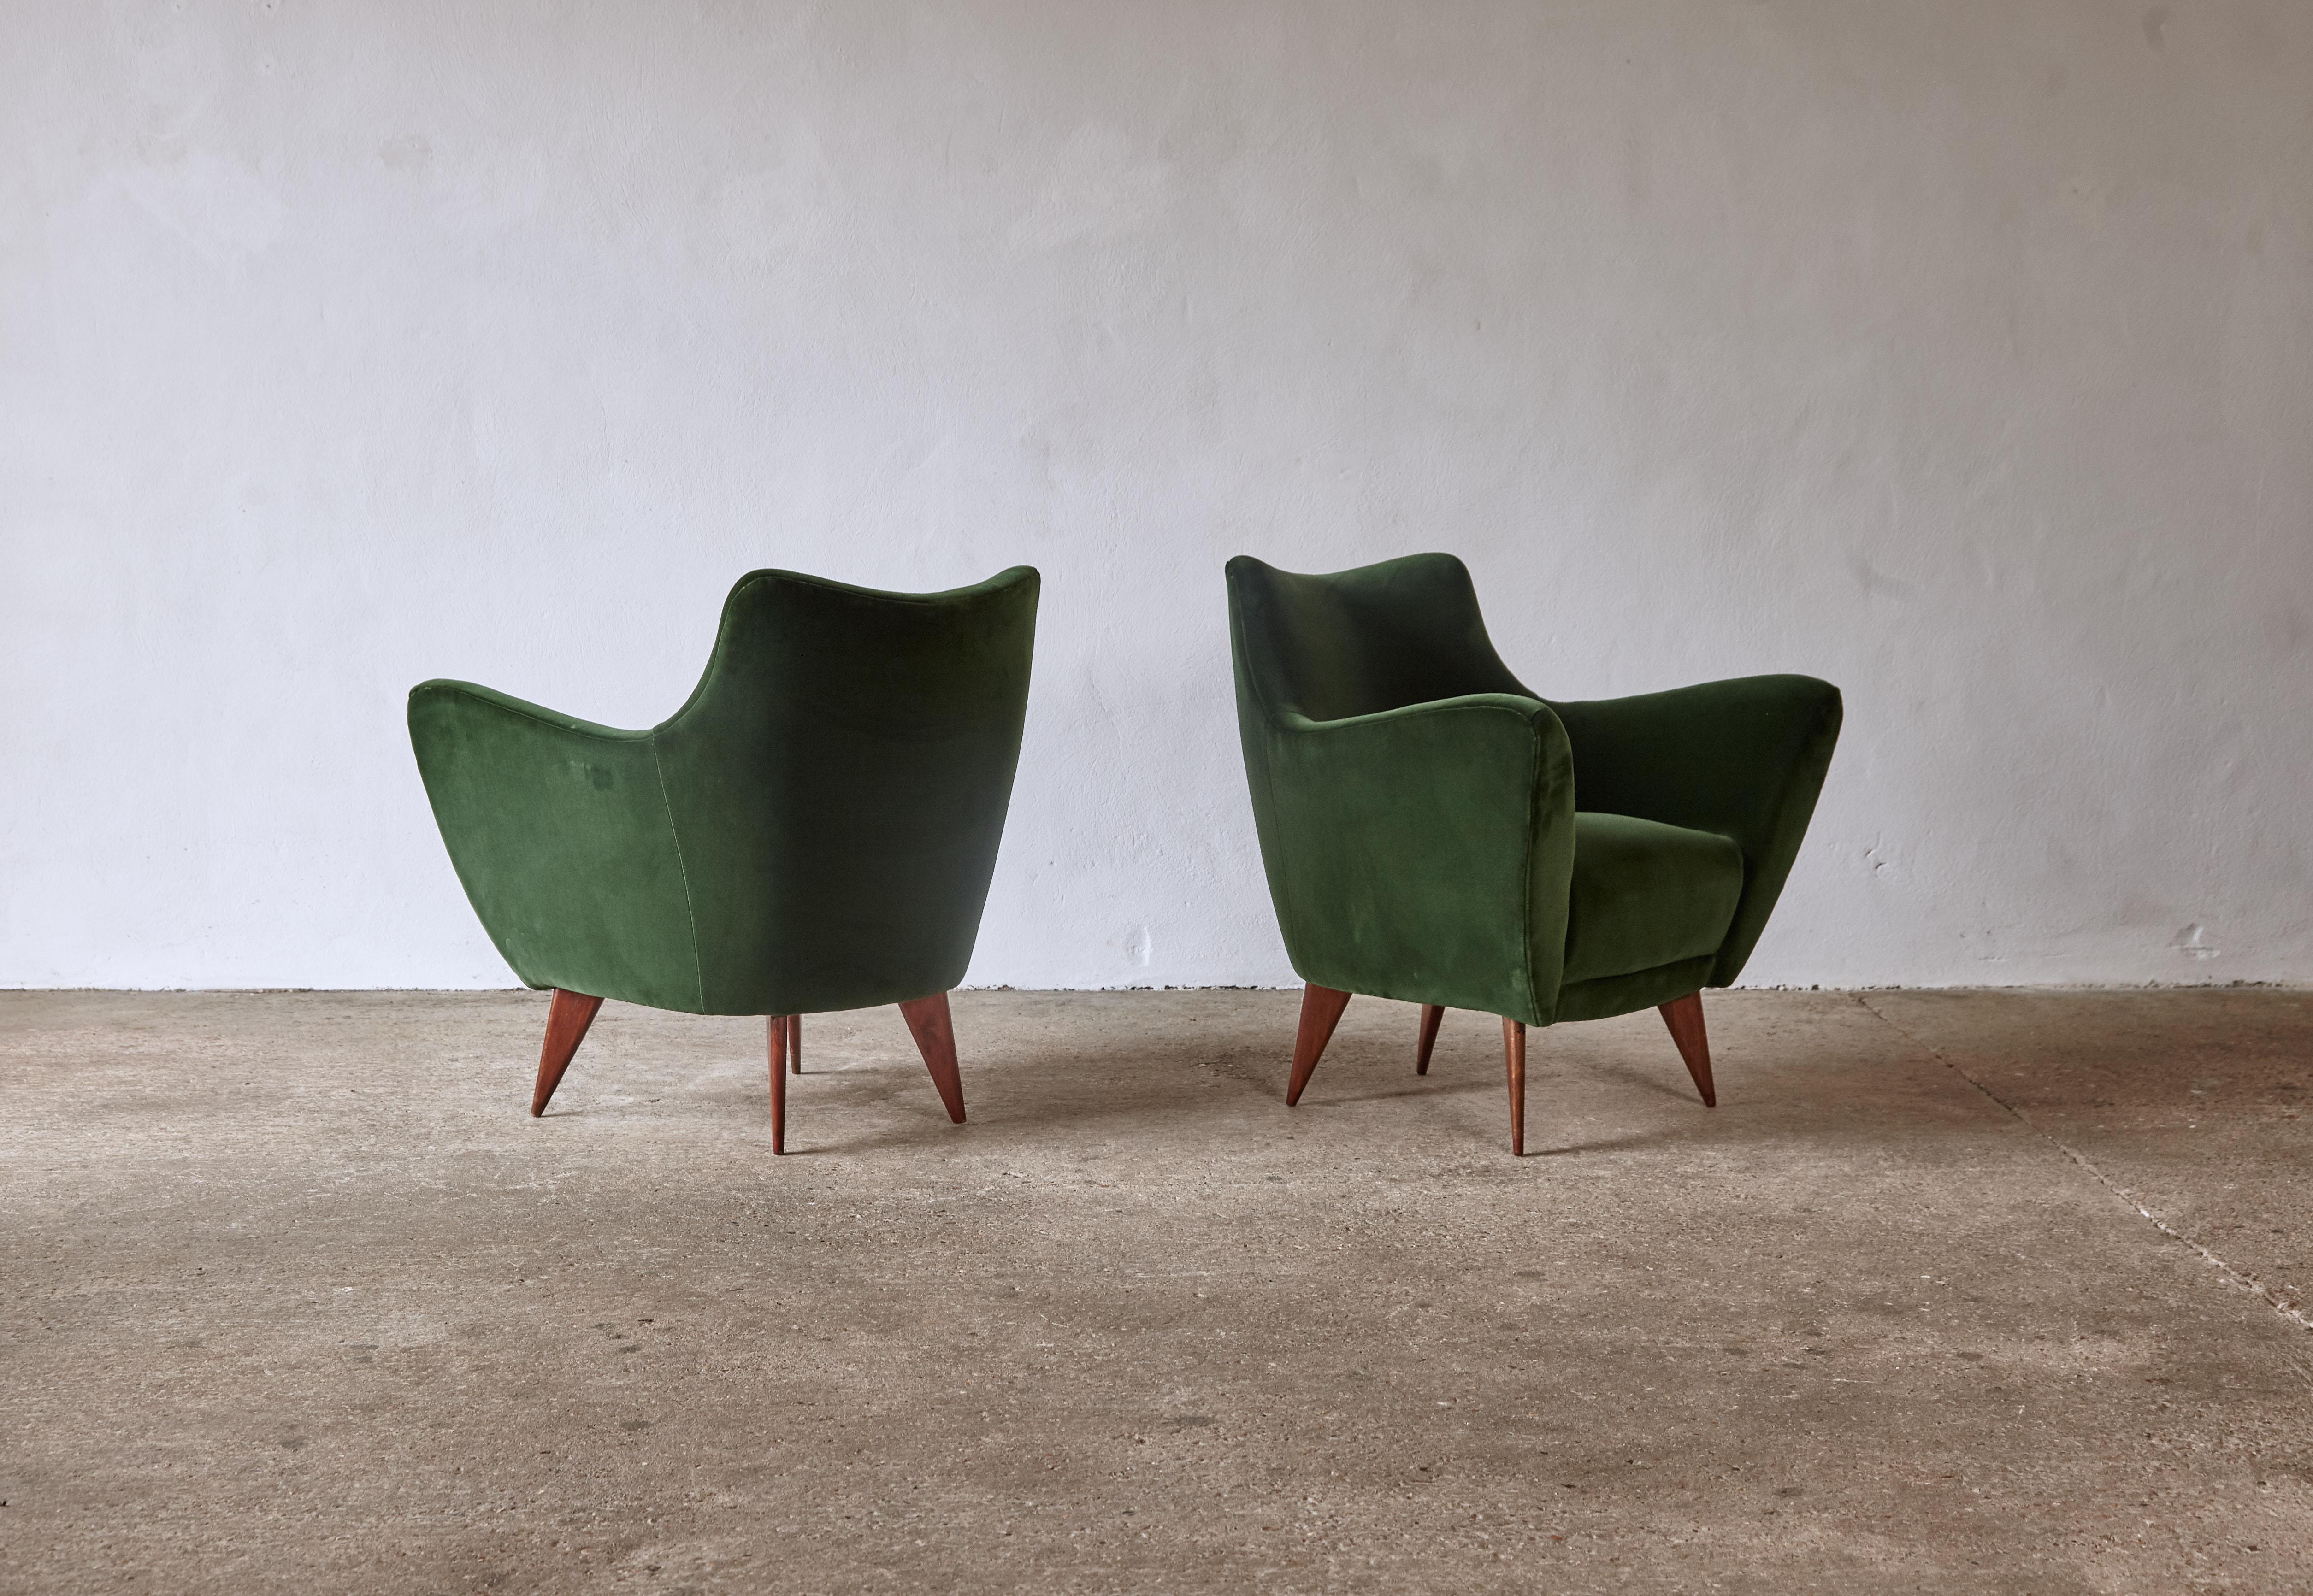 A wonderful pair of original Giulia Veronesi Perla armchairs, I.S.A. Bergamo, Italy, 1950s. Newly reupholstered in a dark geen velvet. Fast shipping worldwide.



UK customers please note: listed prices do not include VAT.